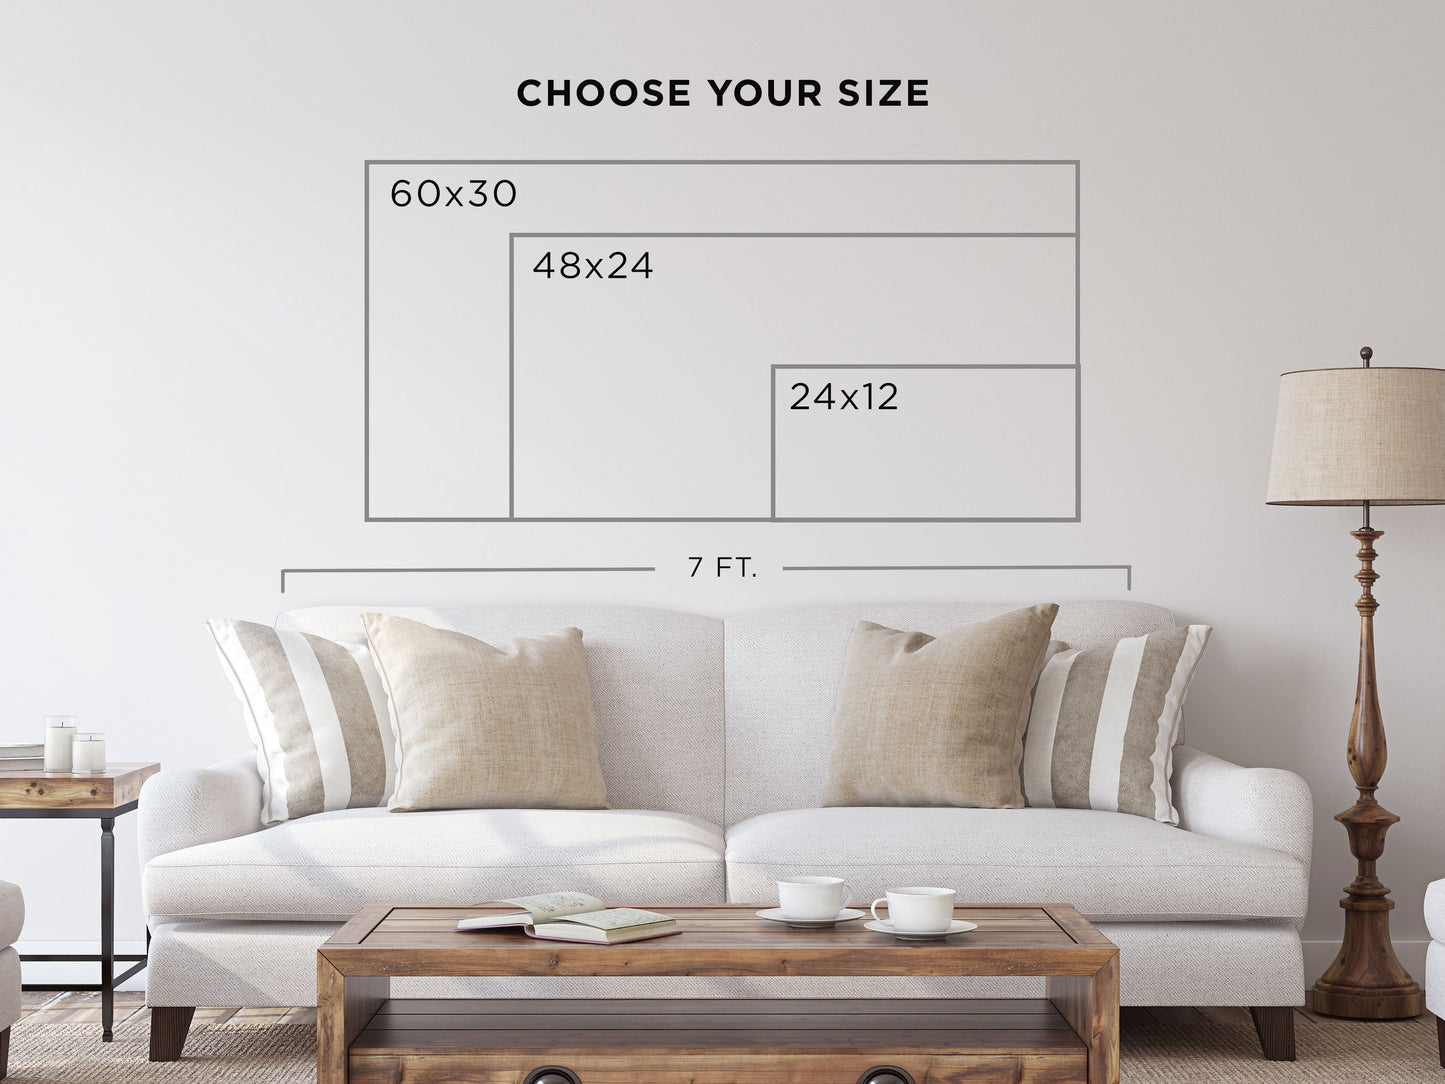 Personalized Family Name Sign size option chart - Transit Design